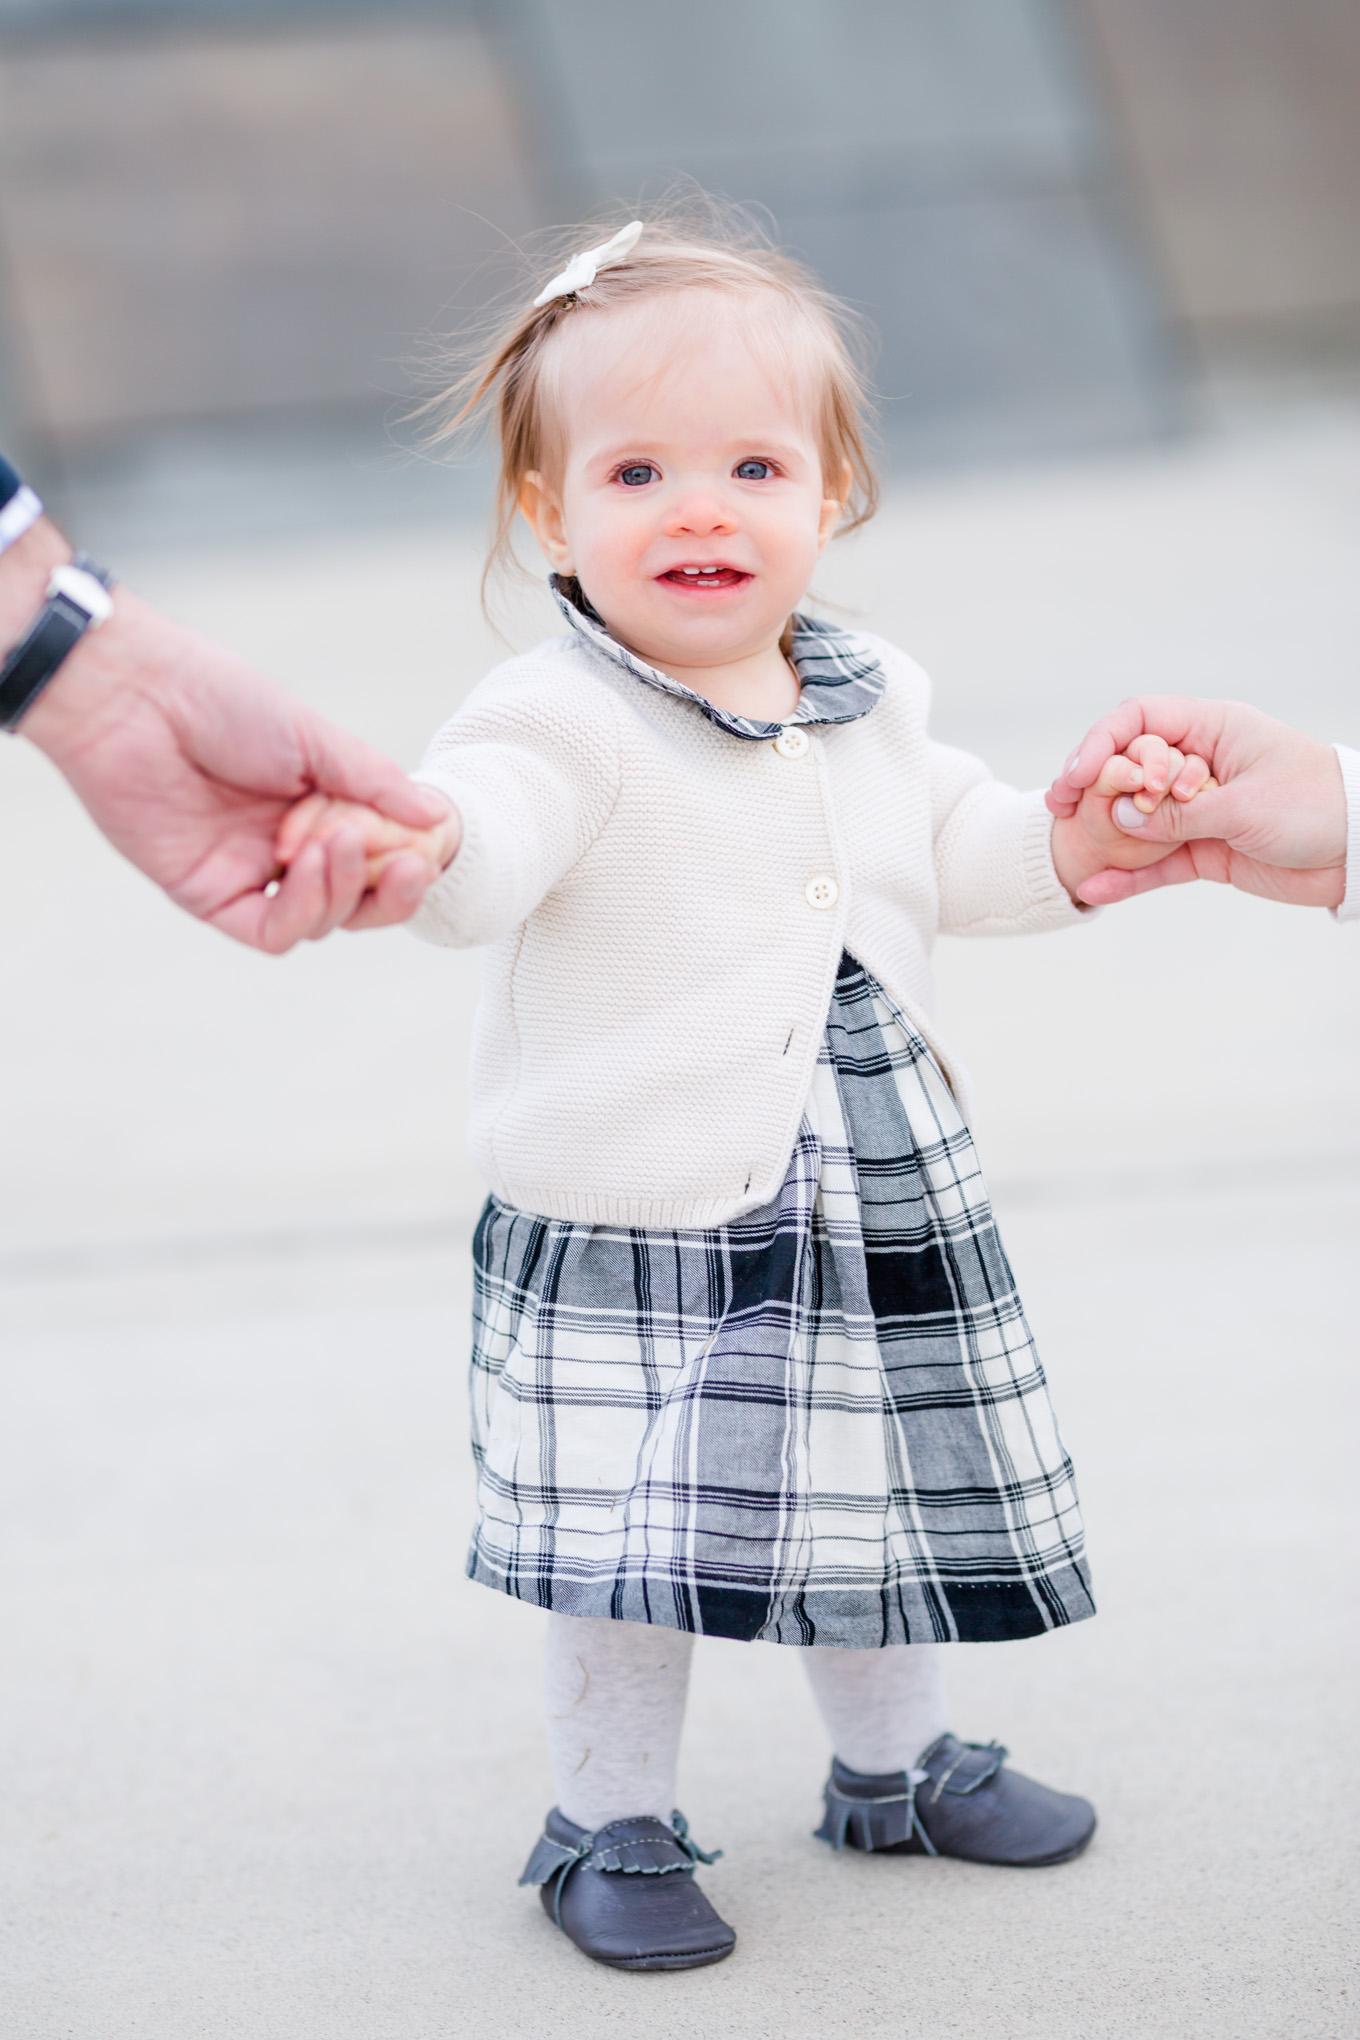 weekend wrap up, Arlington, Virginia family photographer, one year old, baby girl, plaid dress, cream cardigan, family photos style, baby girl style, blue moccasins, winter baby girl outfit